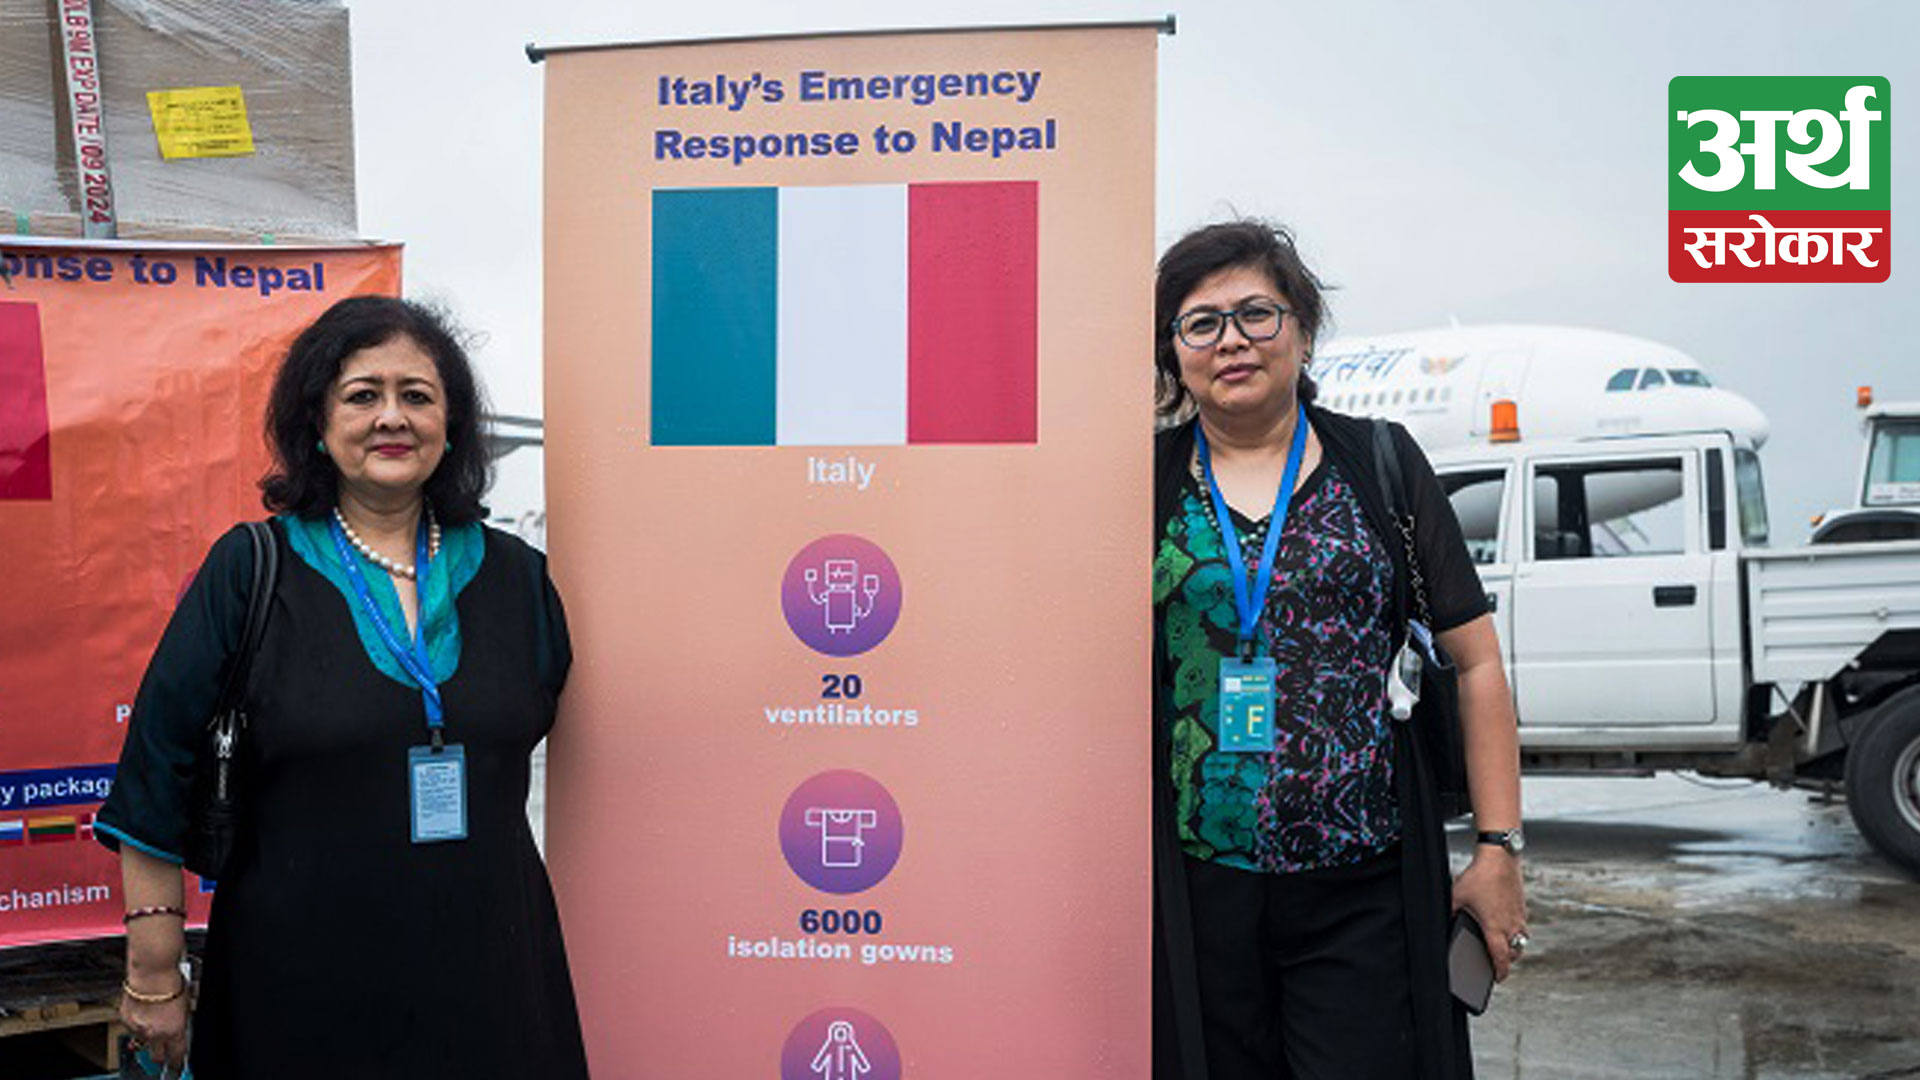 Italy extends support to Nepal to fight COVID pandemic